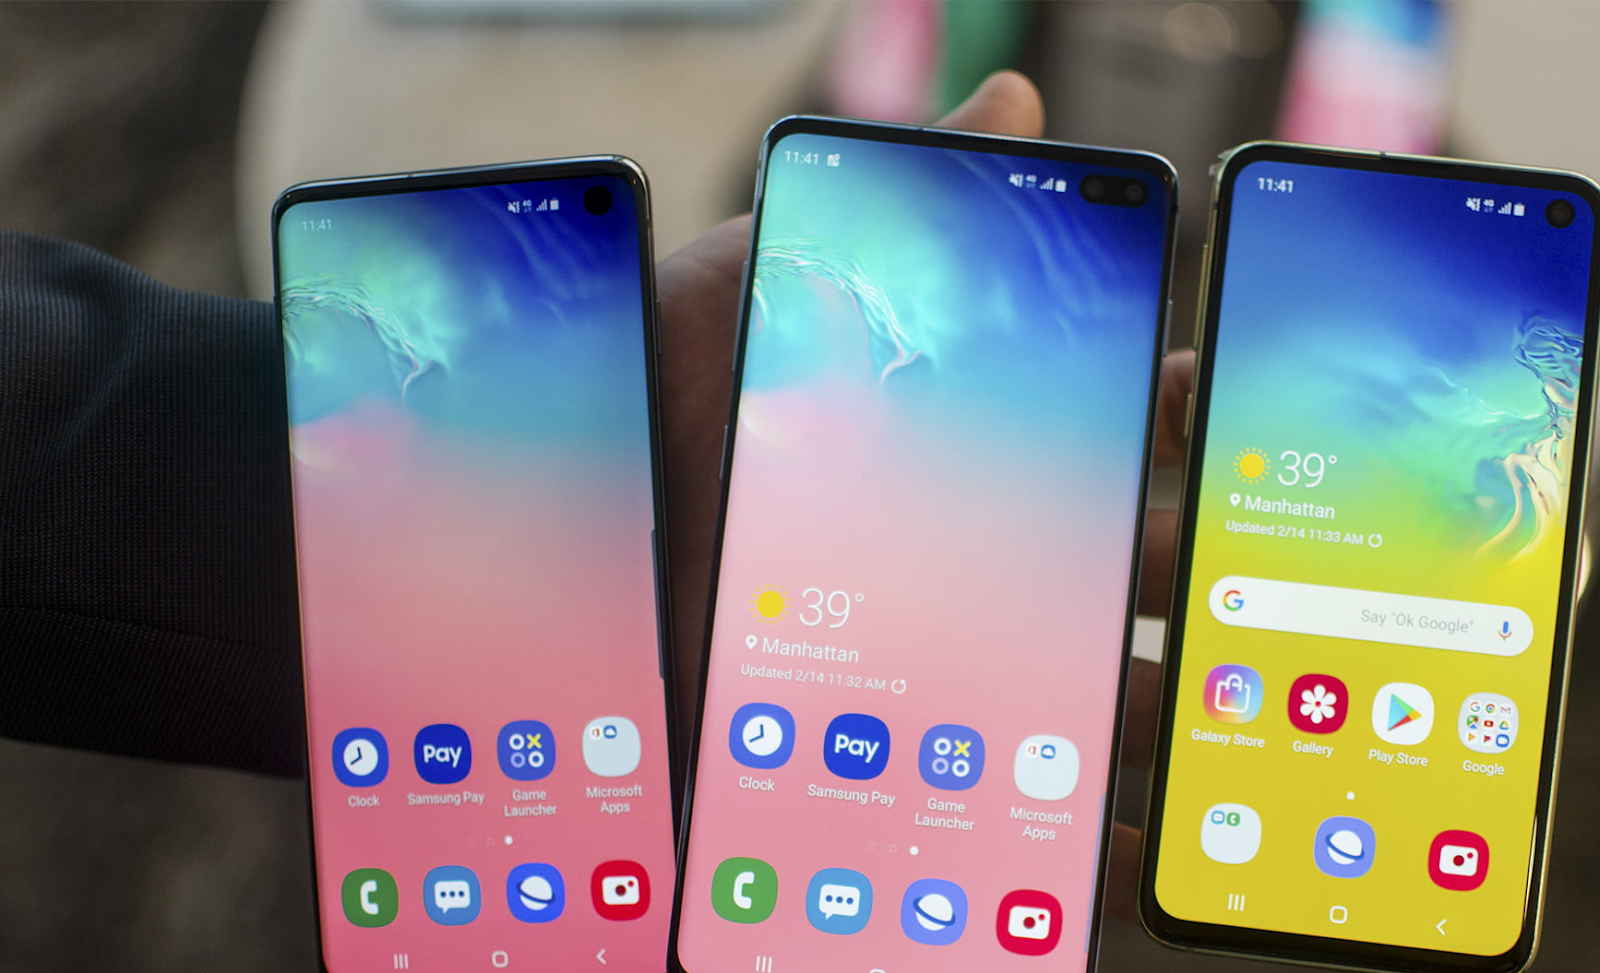 Galaxy S 10 Plus: Specifications & Features - tech4